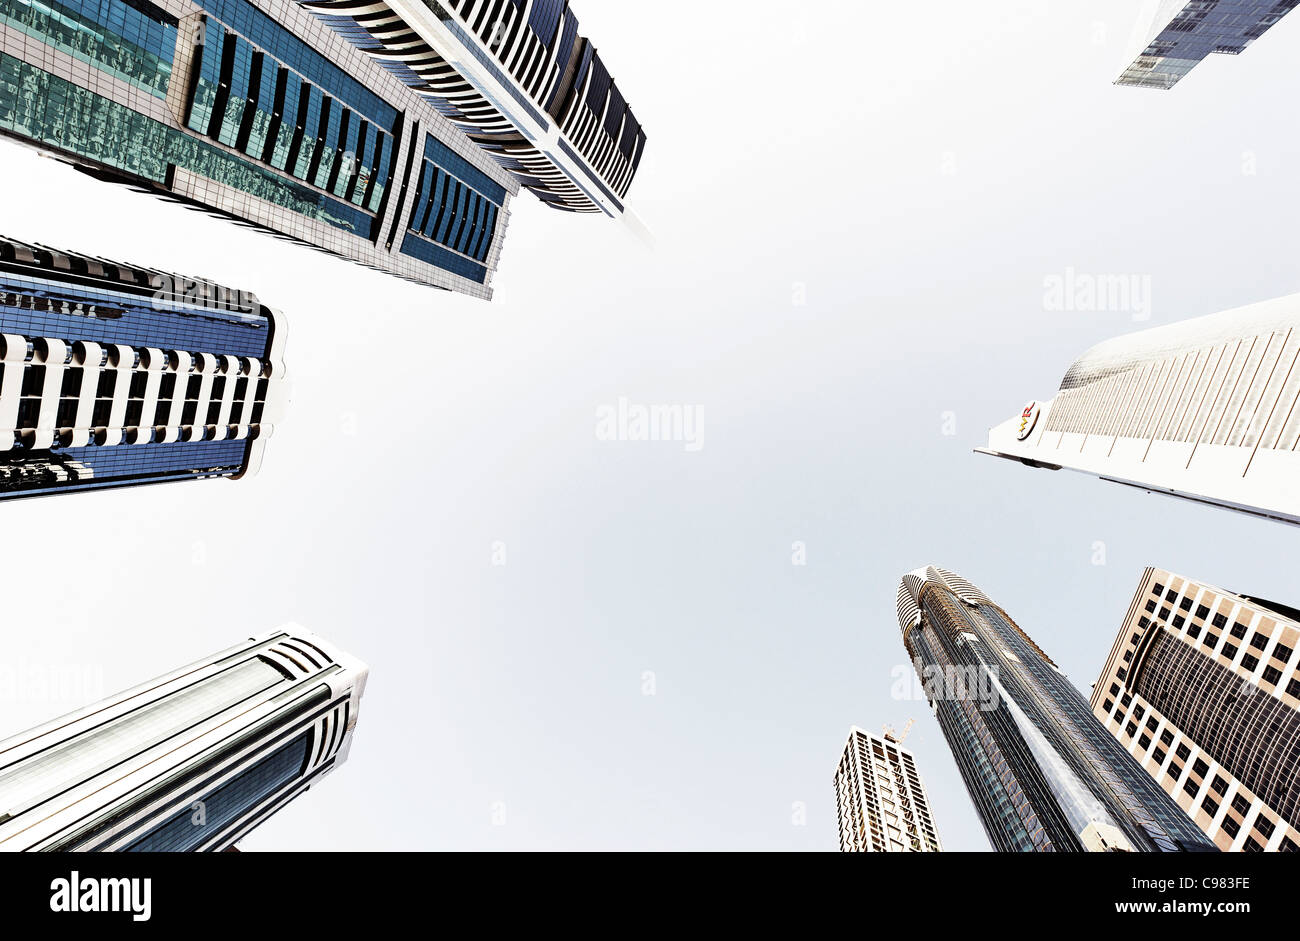 Towers, skyscrapers, hotels, modern architecture, Sheikh Zayed Road, Financial District, Dubai, United Arab Emirates Stock Photo